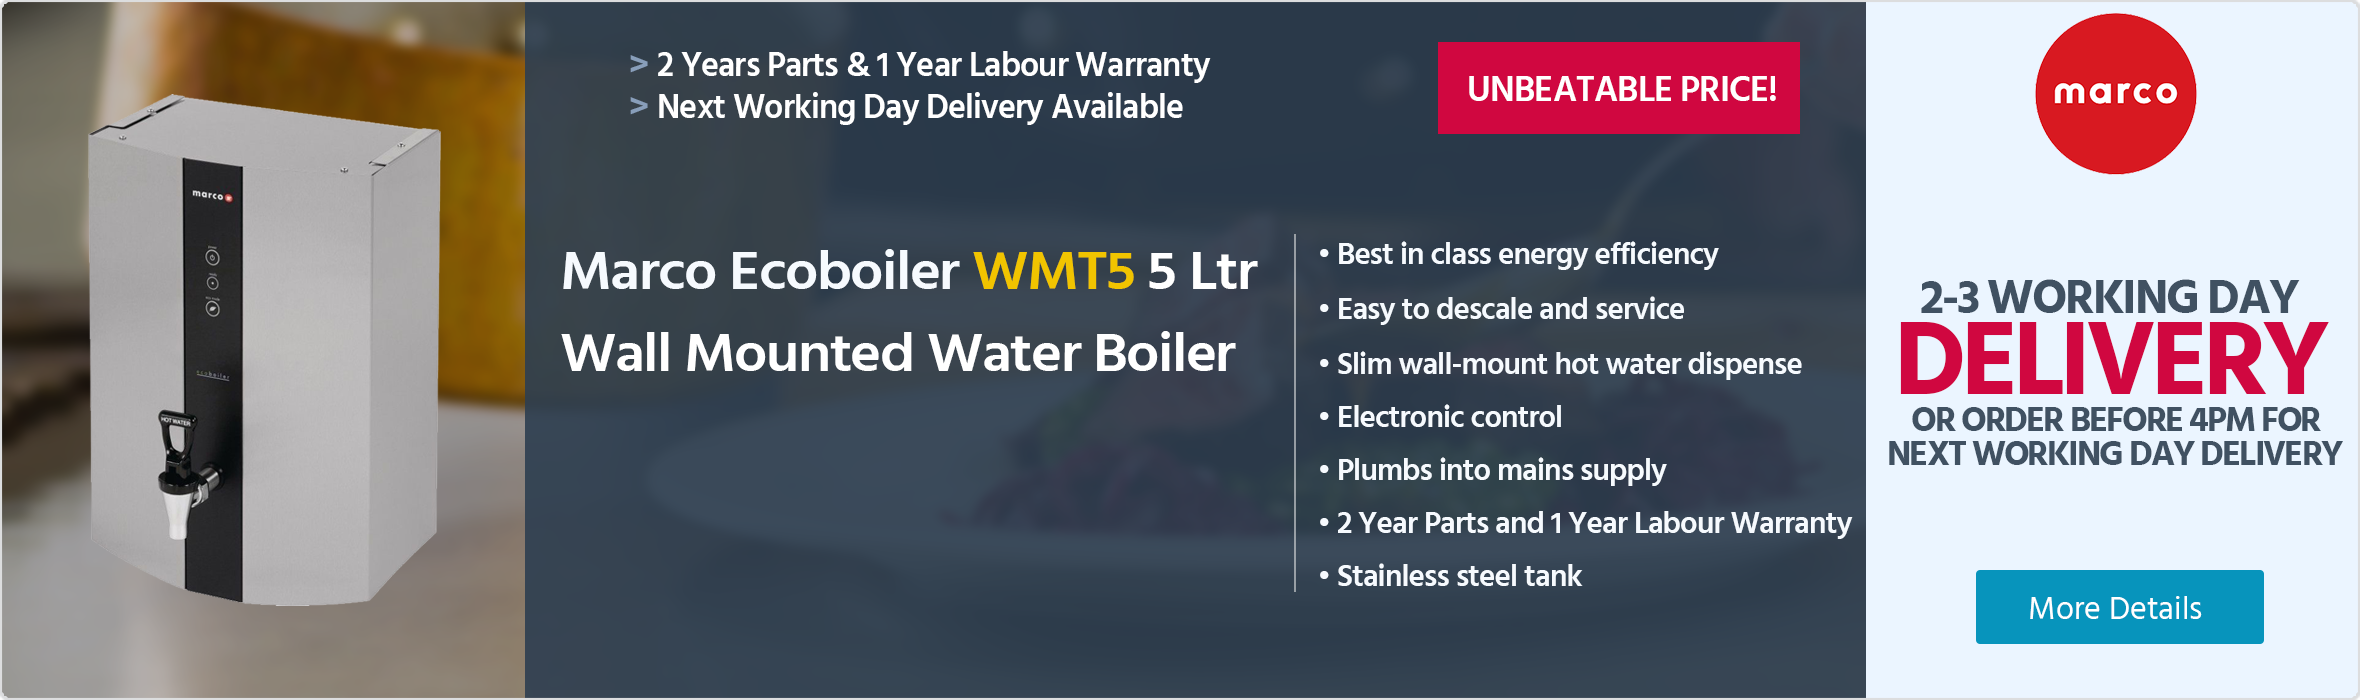 Marco Beverage Systems Ecoboiler WMT5 5 Ltr Wall Mounted Water Boiler